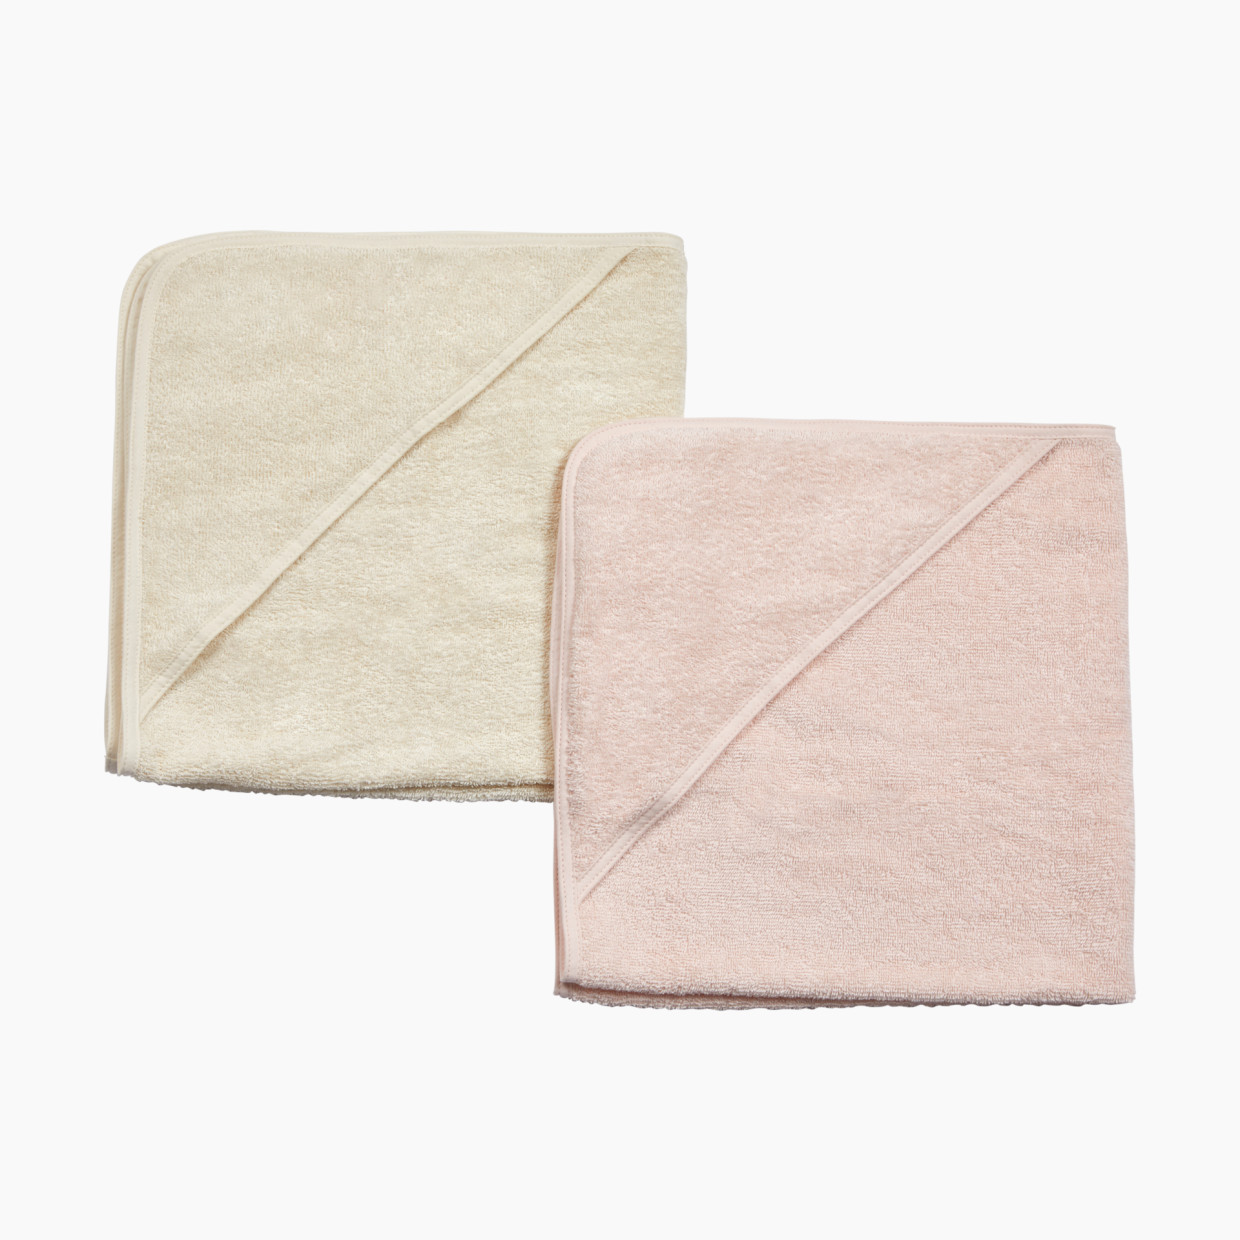 Tiny Kind Hooded Towel (2 Pack) - Cloud Pink/Antique White, 0-24 M.